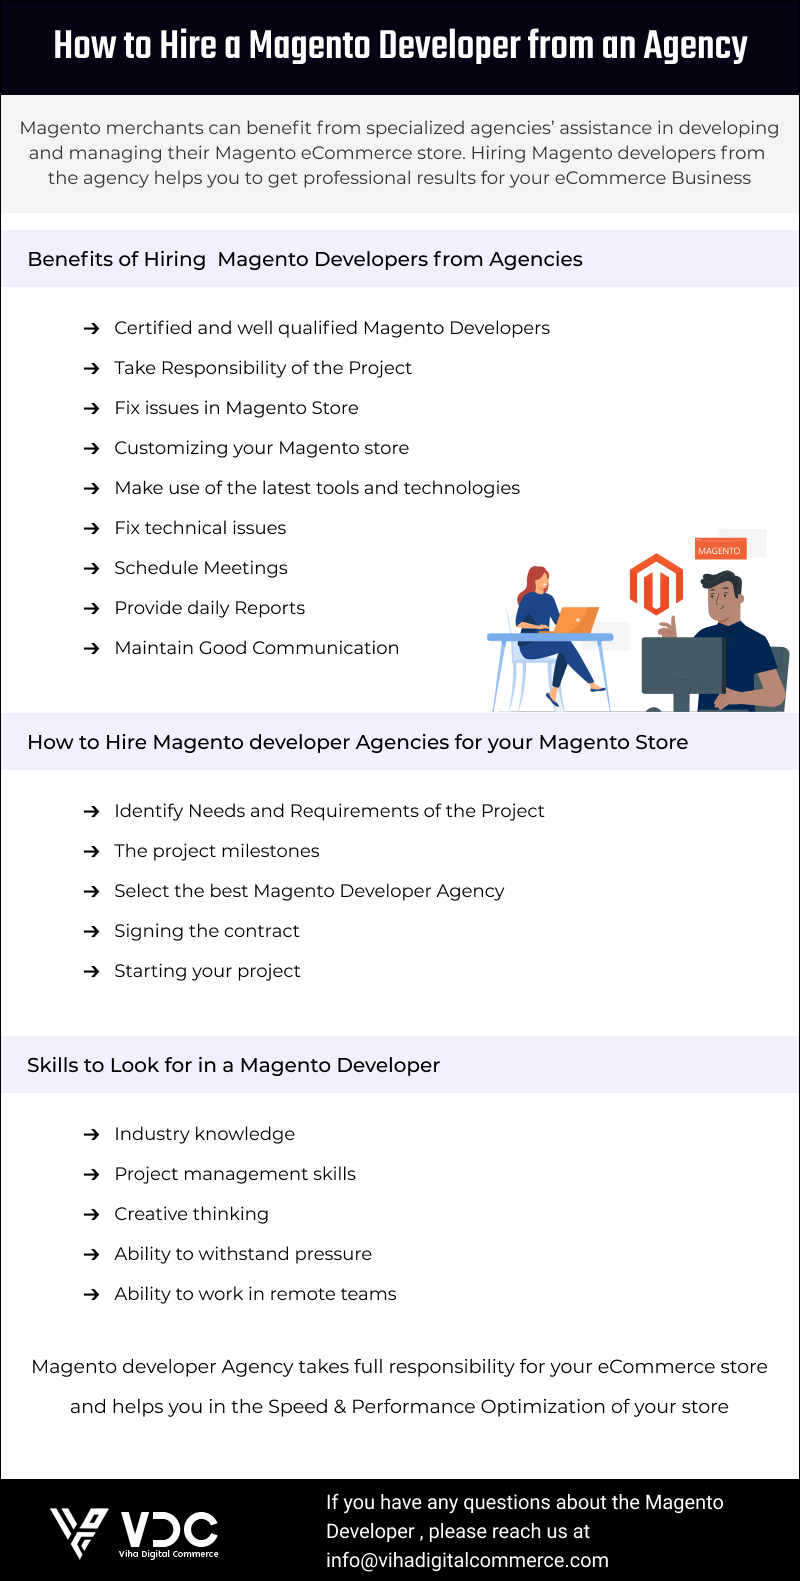 How to Hire a Magento Developer from an Agency